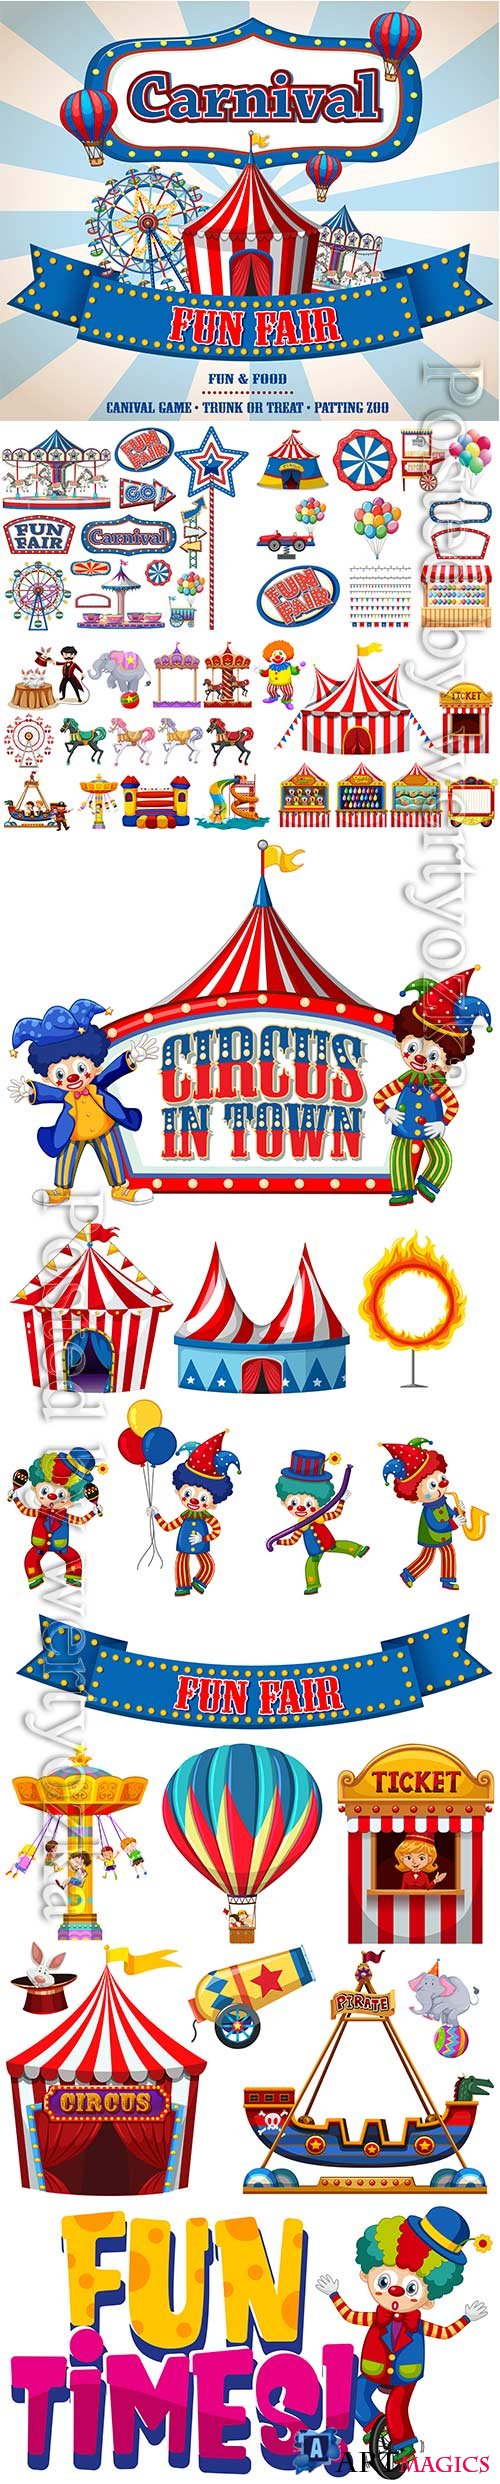 Set of circus items vector illustration